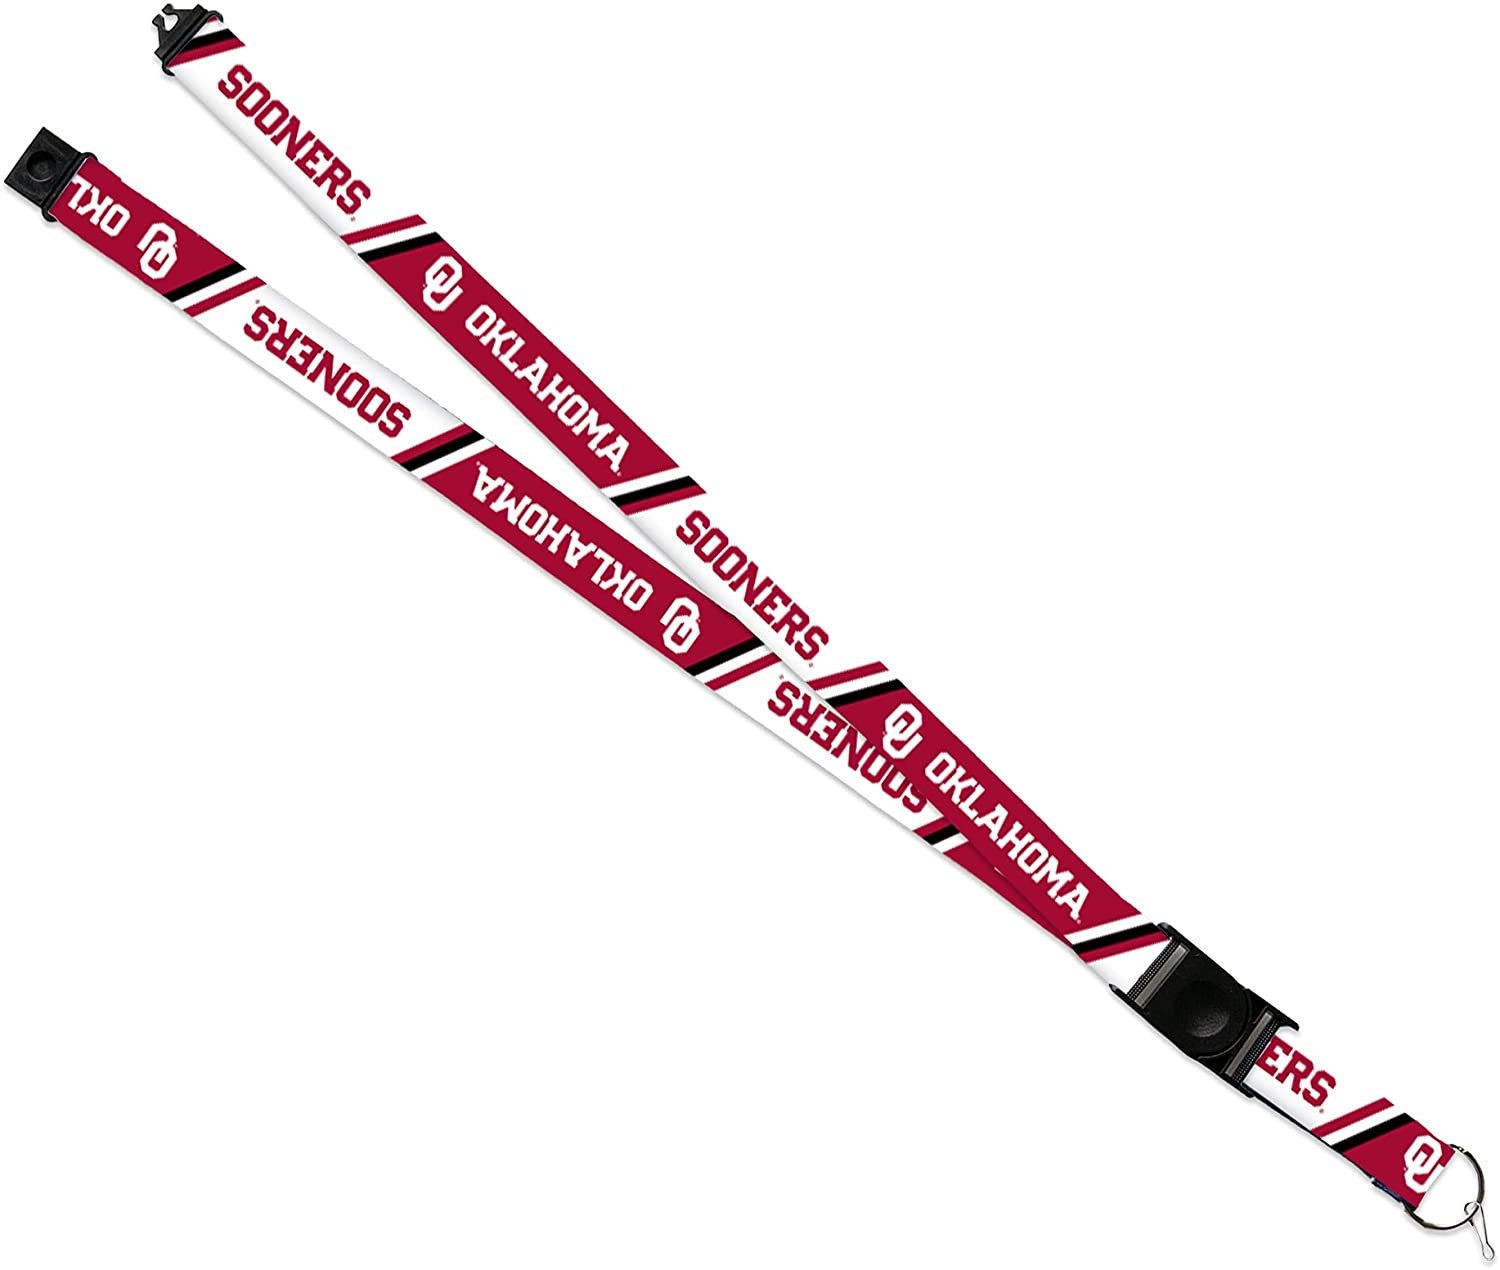 University of Oklahoma Sooners Lanyard Keychain Double Sided 18 Inch Button Clip Safety Breakaway